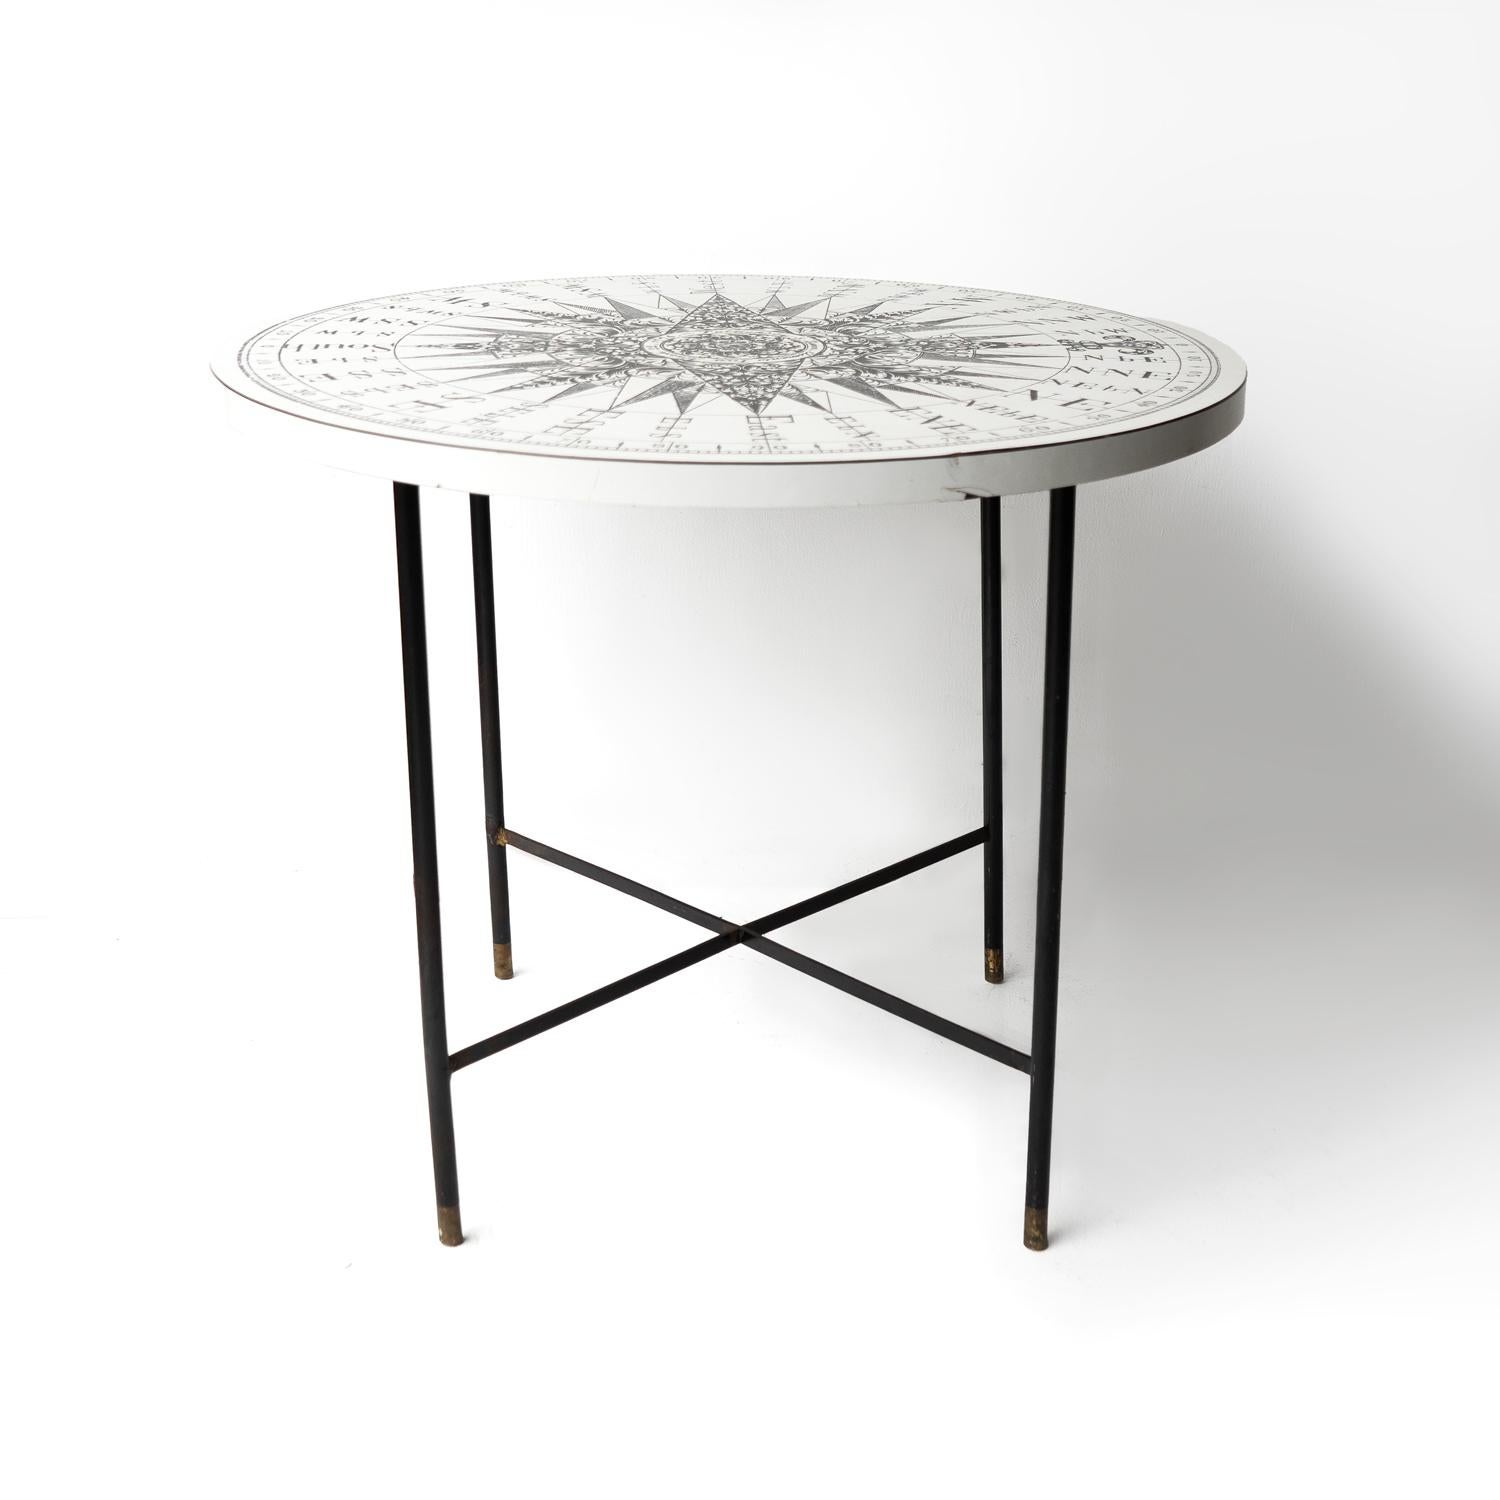 MID-CENTURY CIRCULAR TABLE 

A good quality Formica-topped table with an elegant and stylish black steel base tipped with brass feet. 

The top is printed with a monochrome compass design after an 18th-century drawing by Samuel Dunn and it is